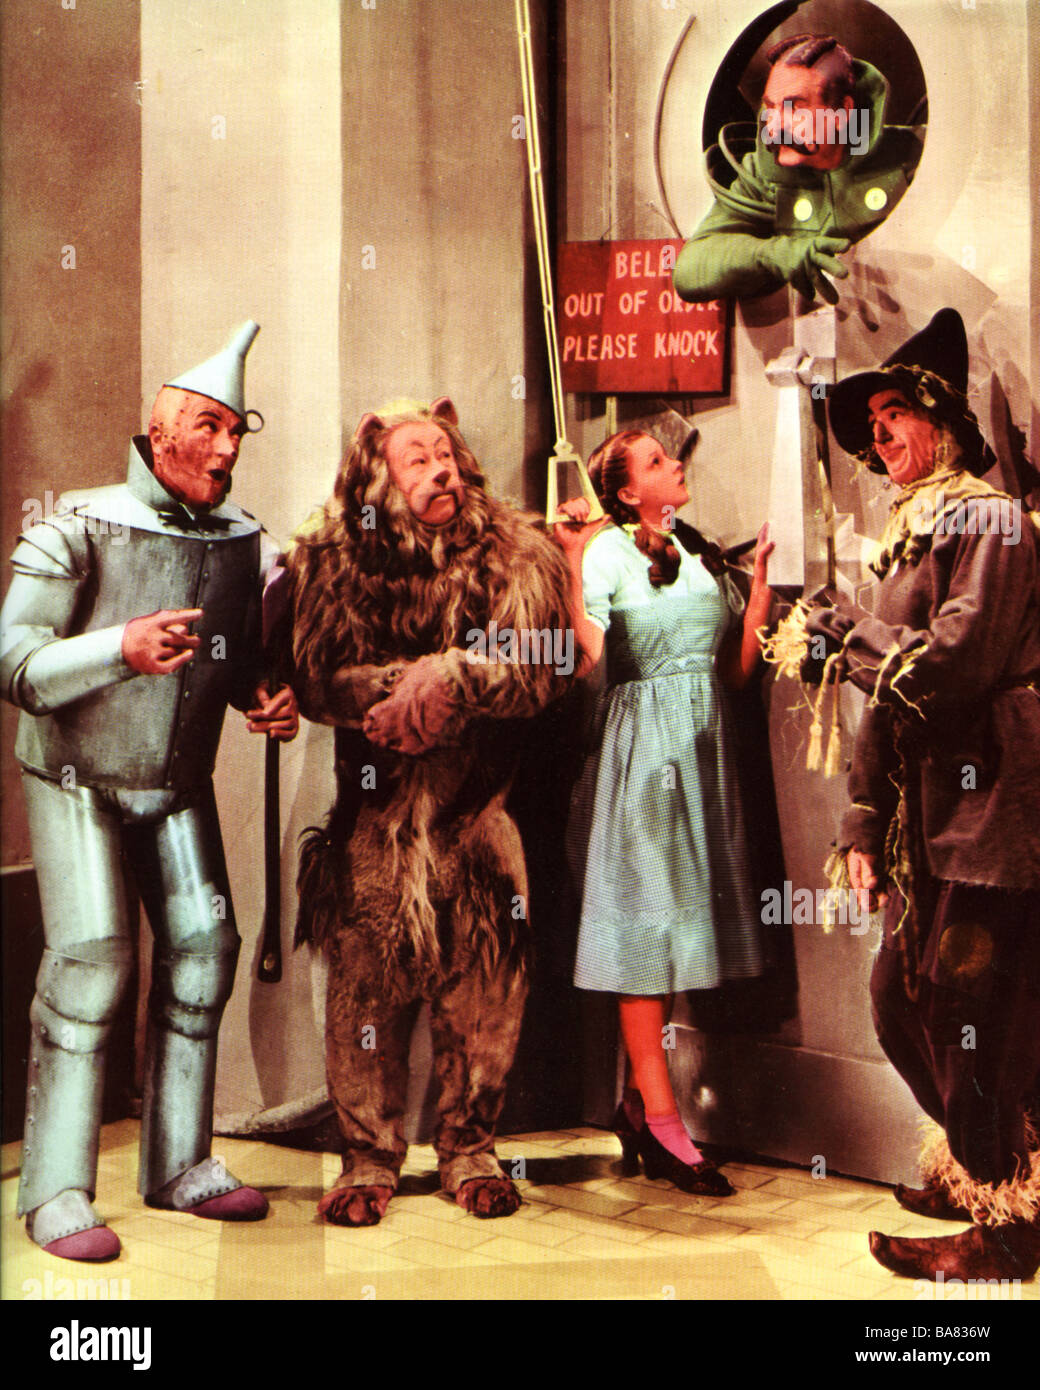 THE WIZARD OF OZ 1939 MGM film - see Description below for ...
